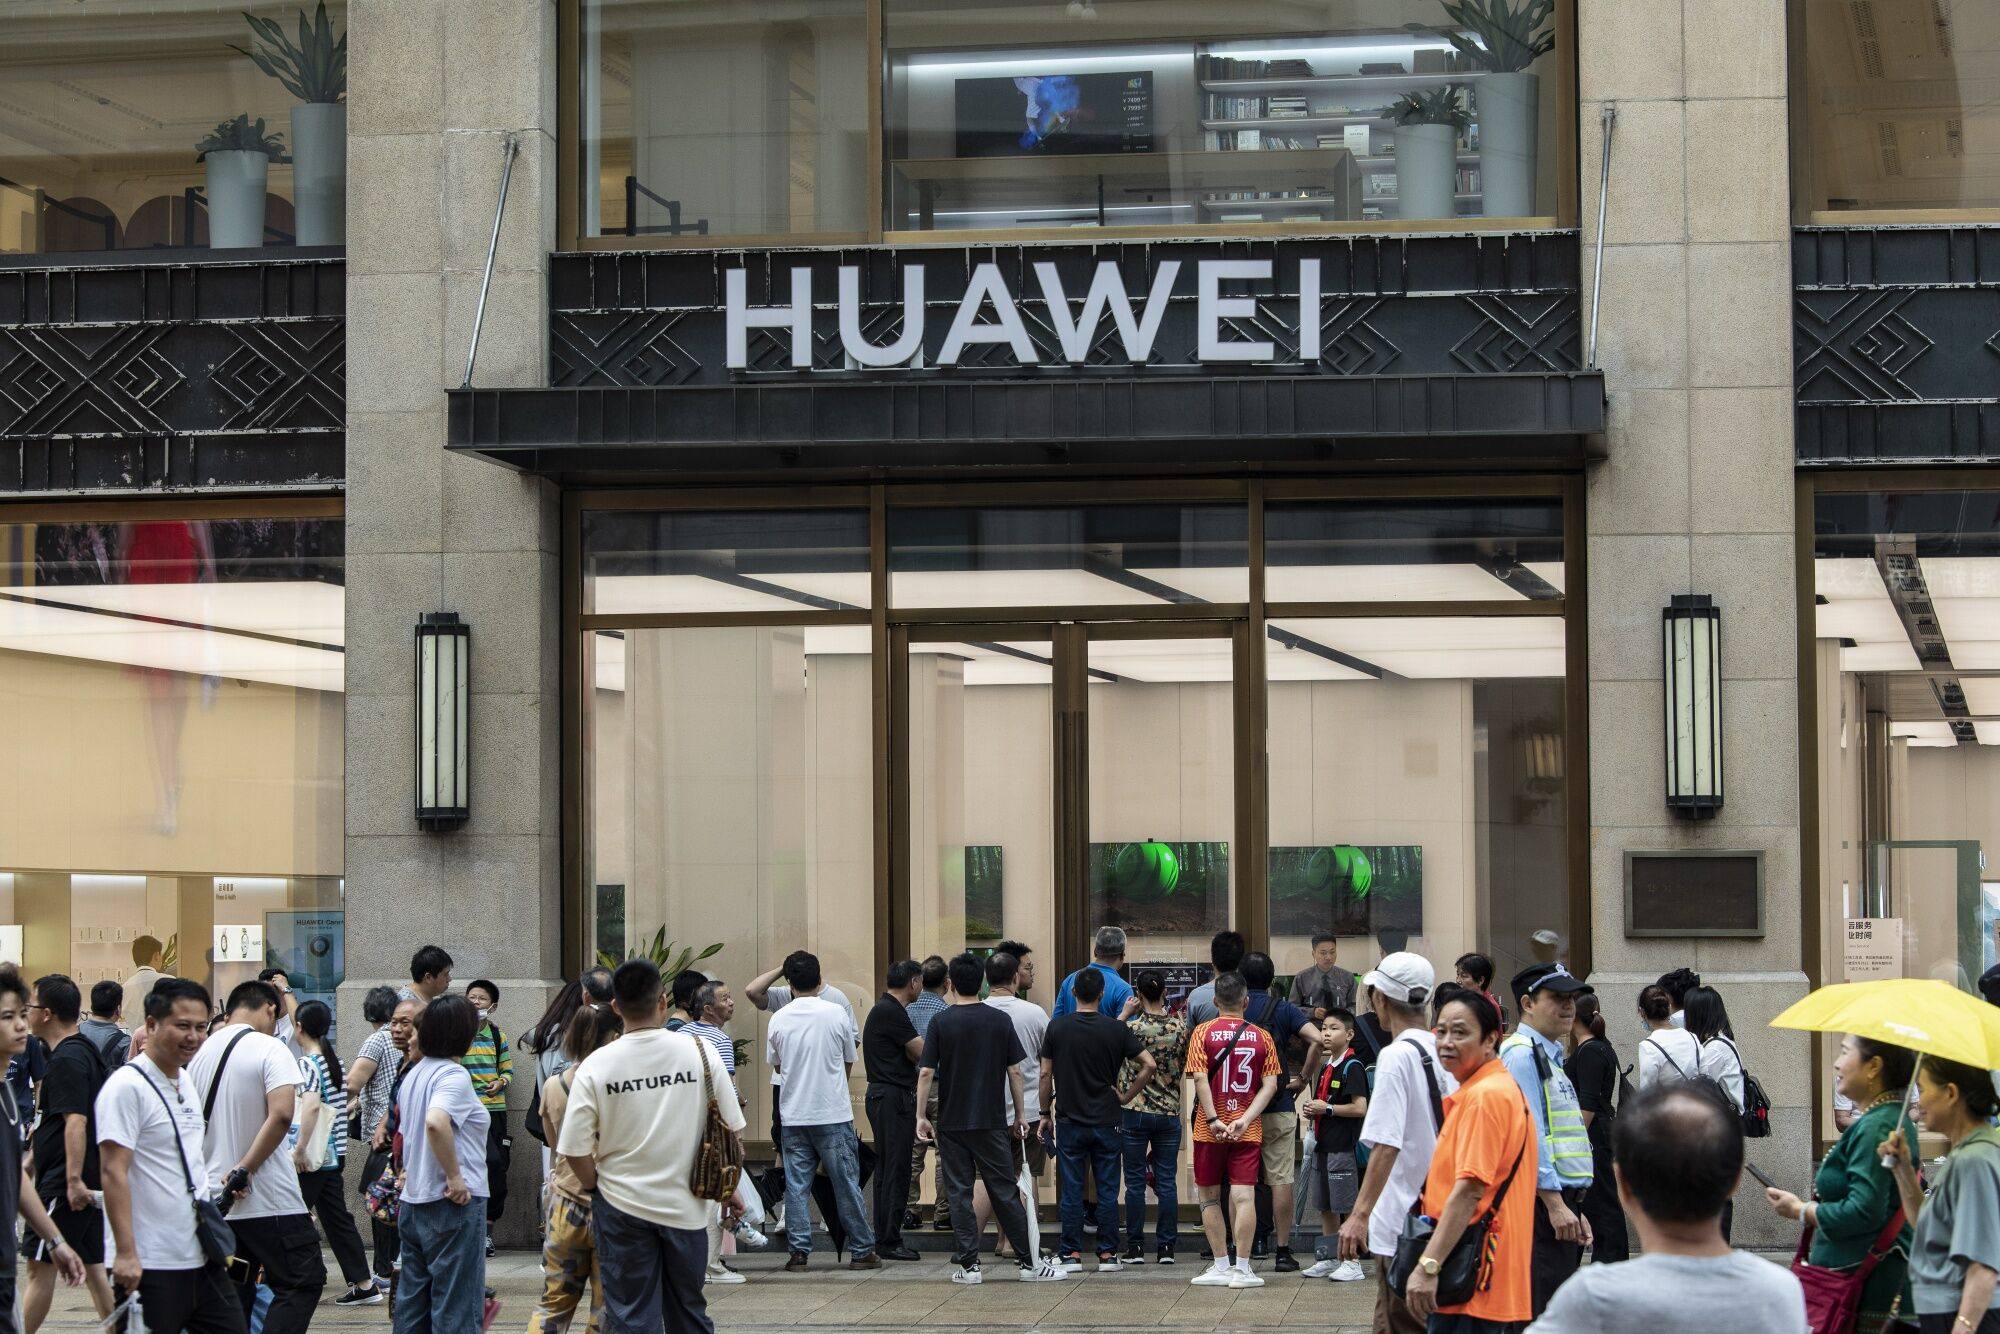 A Huawei flagship store in Shanghai, China. Photo: Bloomberg